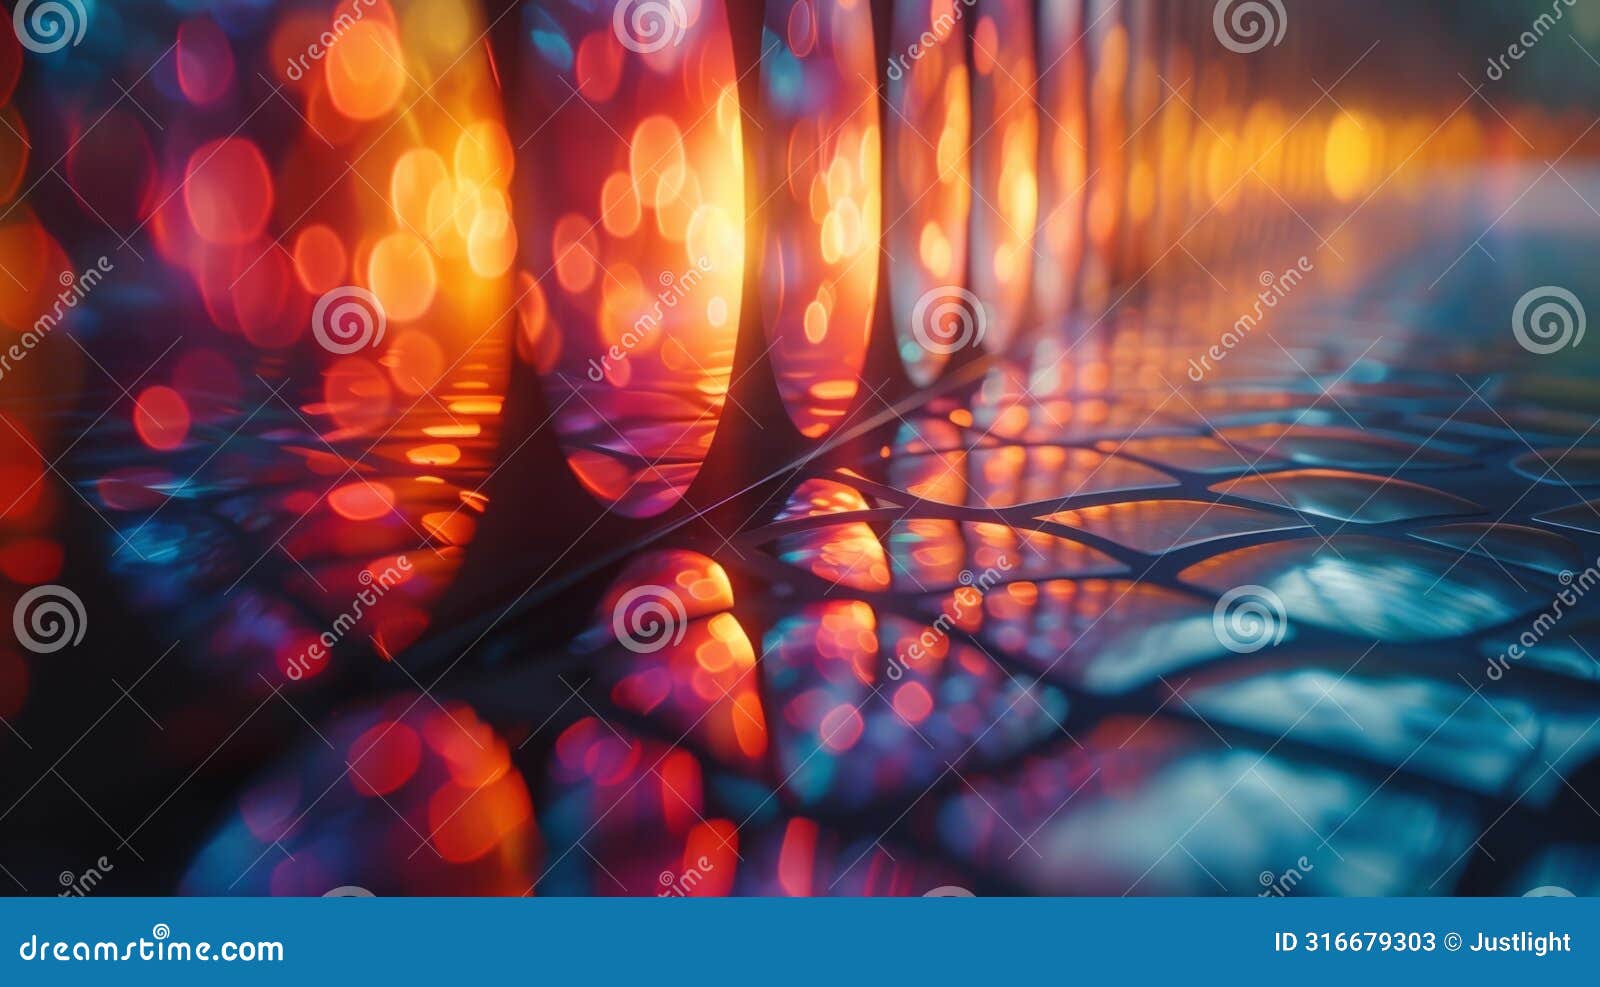 closeup of swirling light patterns projected onto a gl surface resembling a colorful kaleidoscop